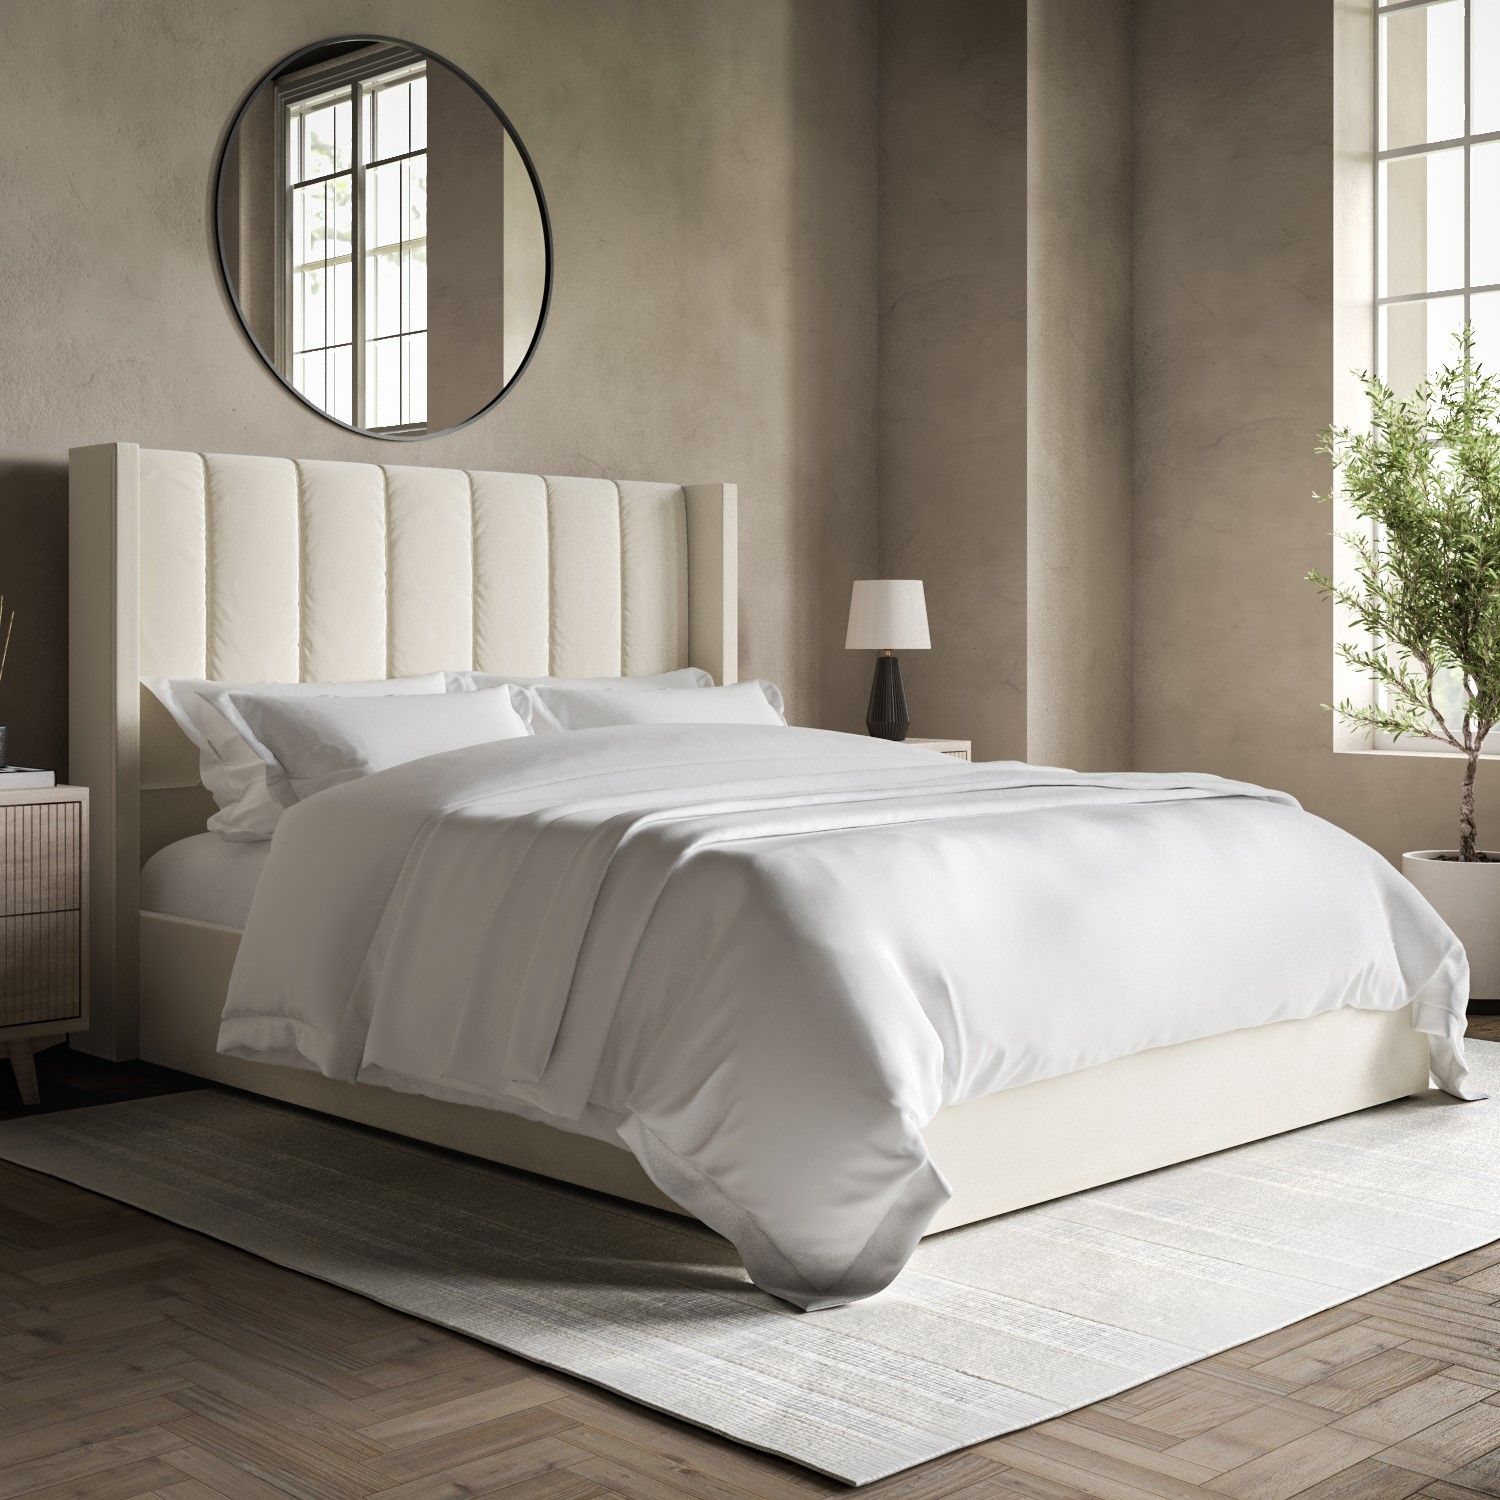 Upgrade Your Bedroom with Stylish Double Bed Headboards